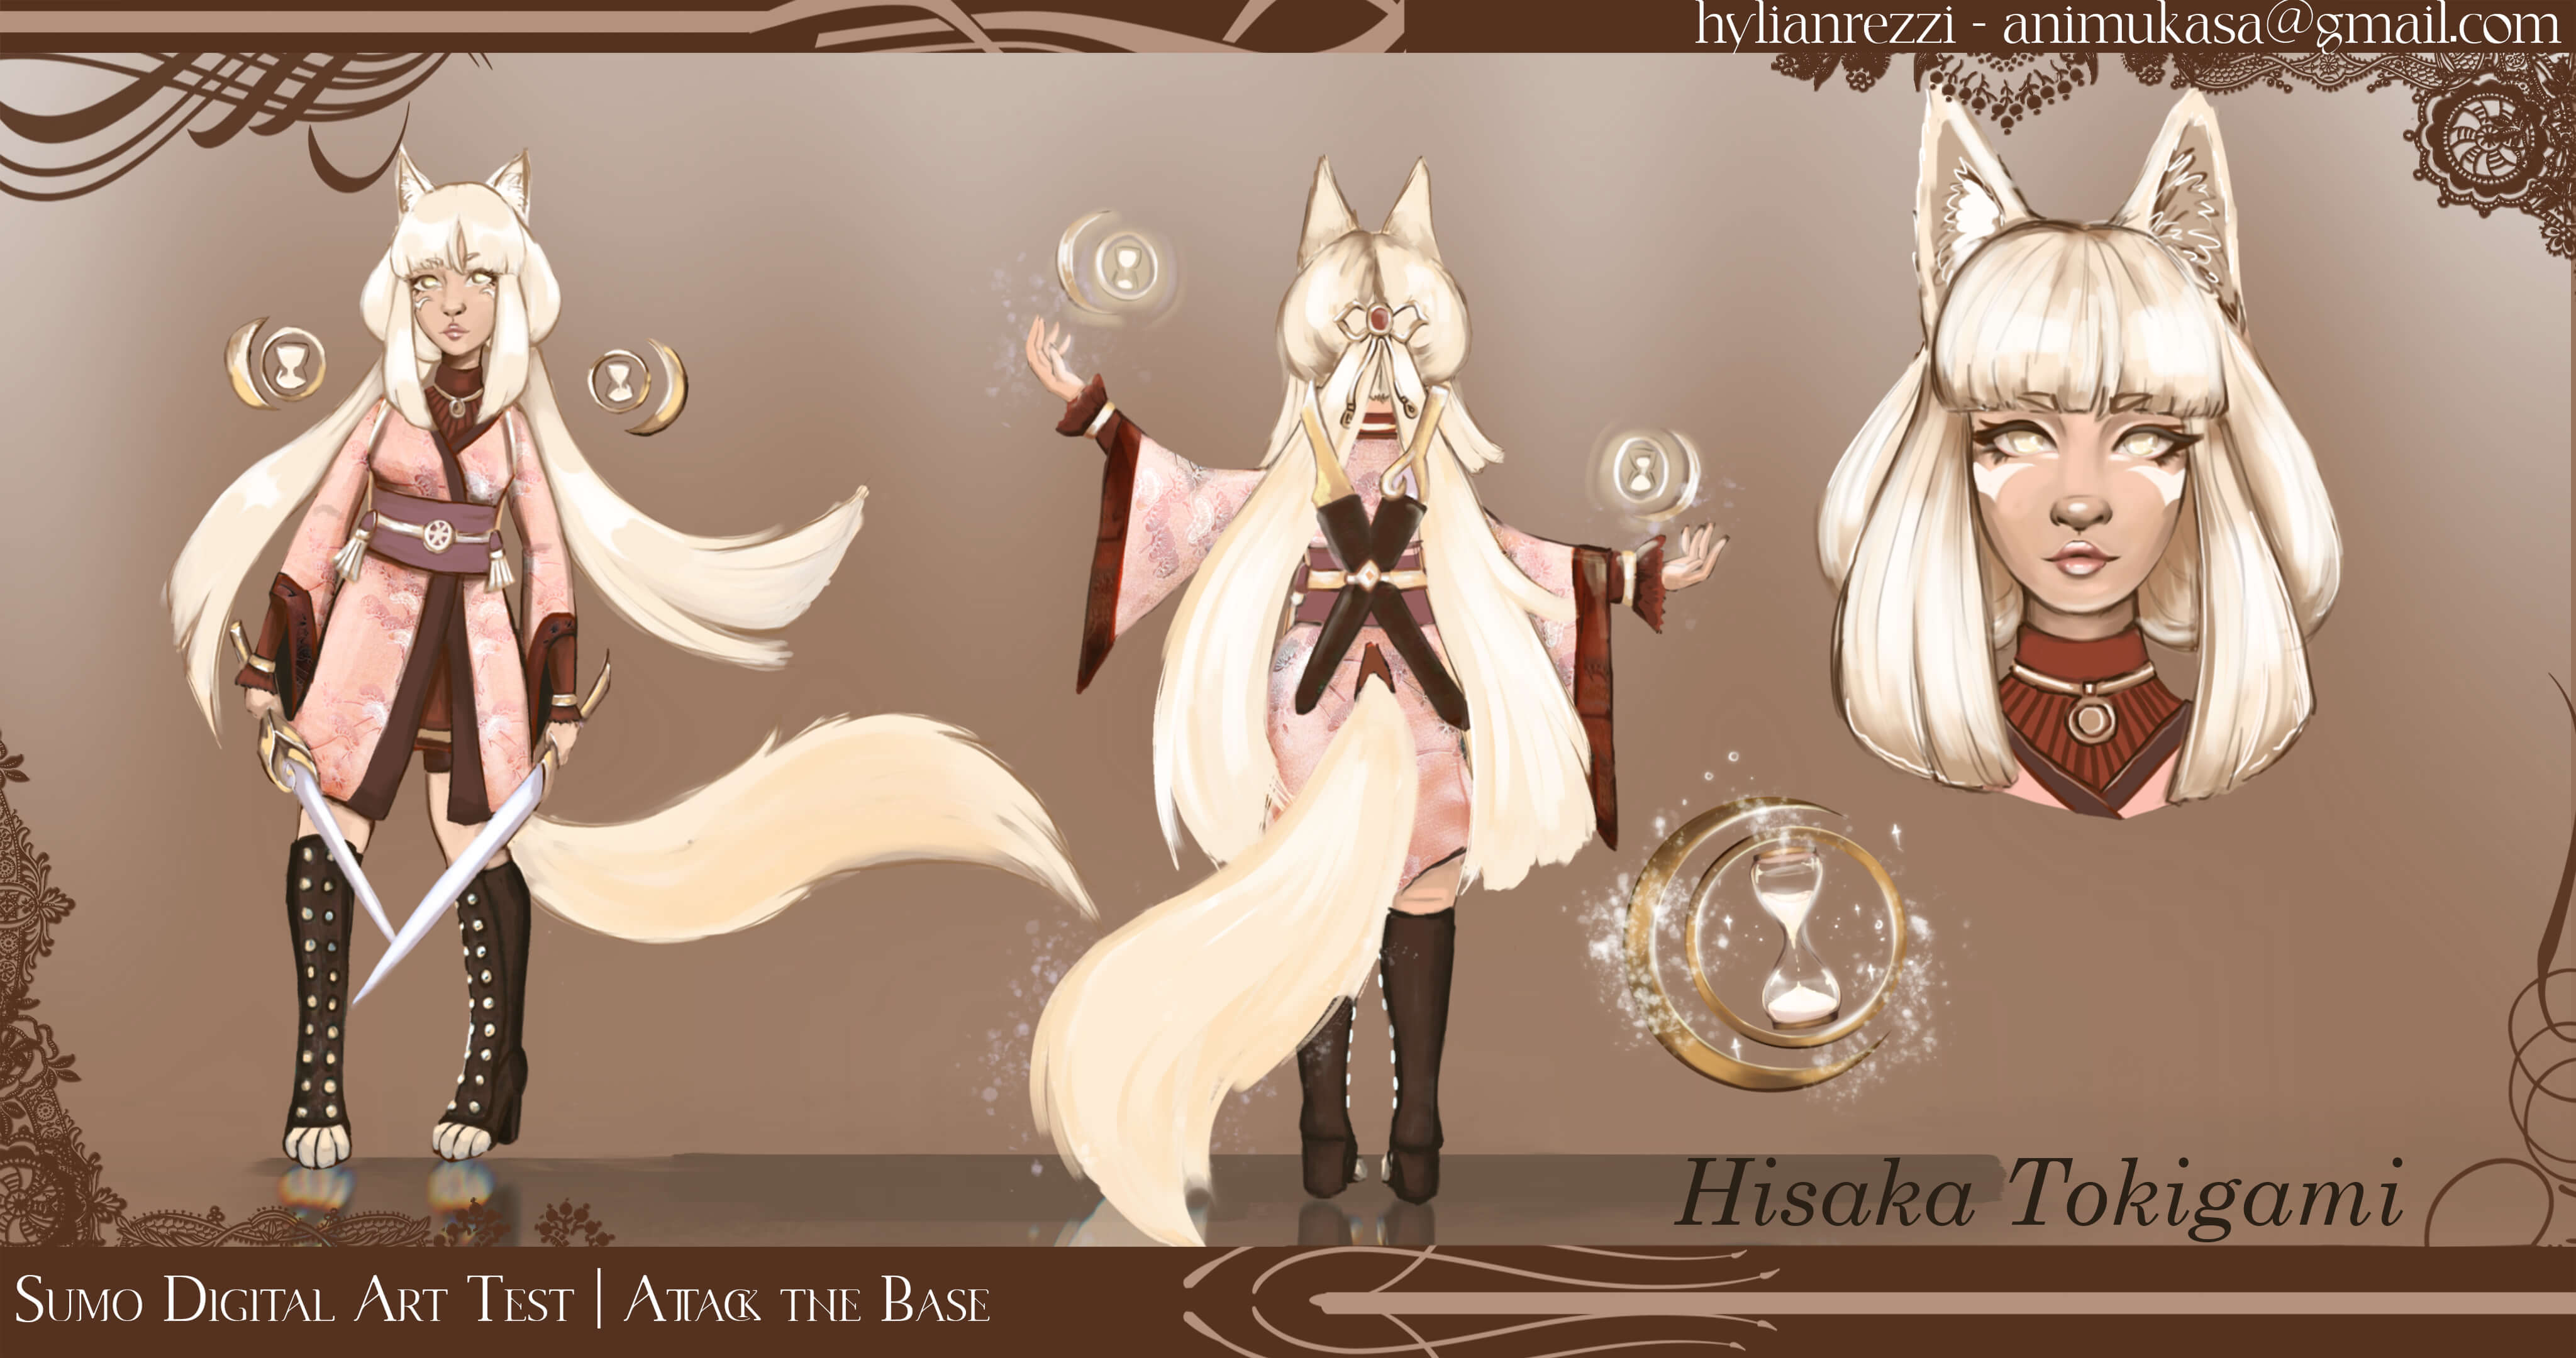 A character design sheet displaying a front and back view of a humanoid girl with wolf ears and tail in a short kimono-like outfit.